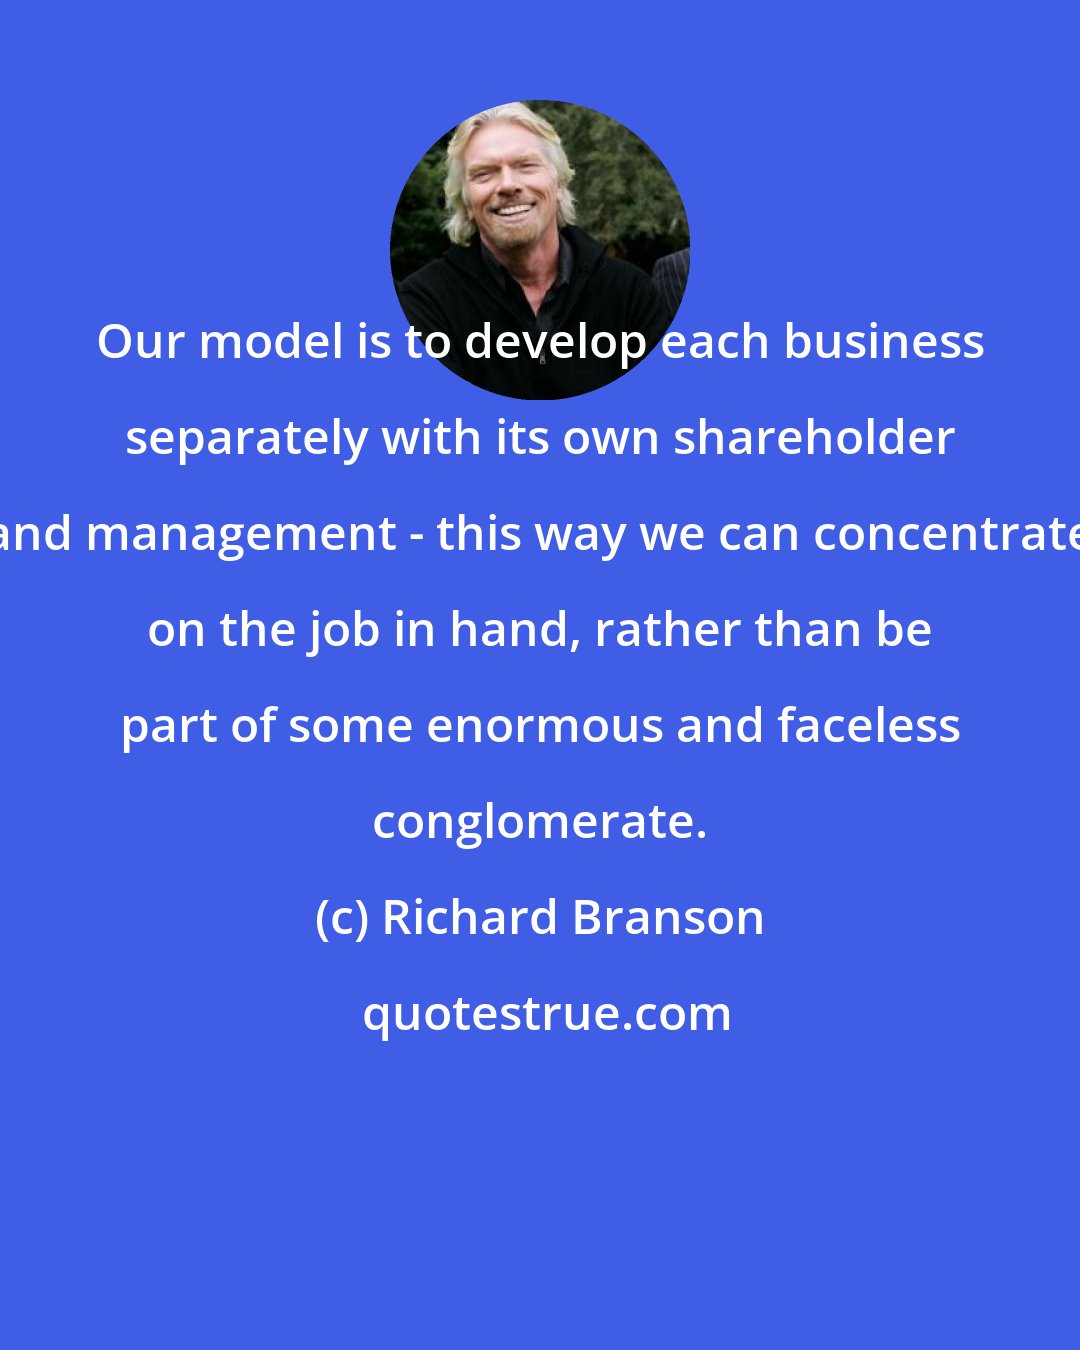 Richard Branson: Our model is to develop each business separately with its own shareholder and management - this way we can concentrate on the job in hand, rather than be part of some enormous and faceless conglomerate.